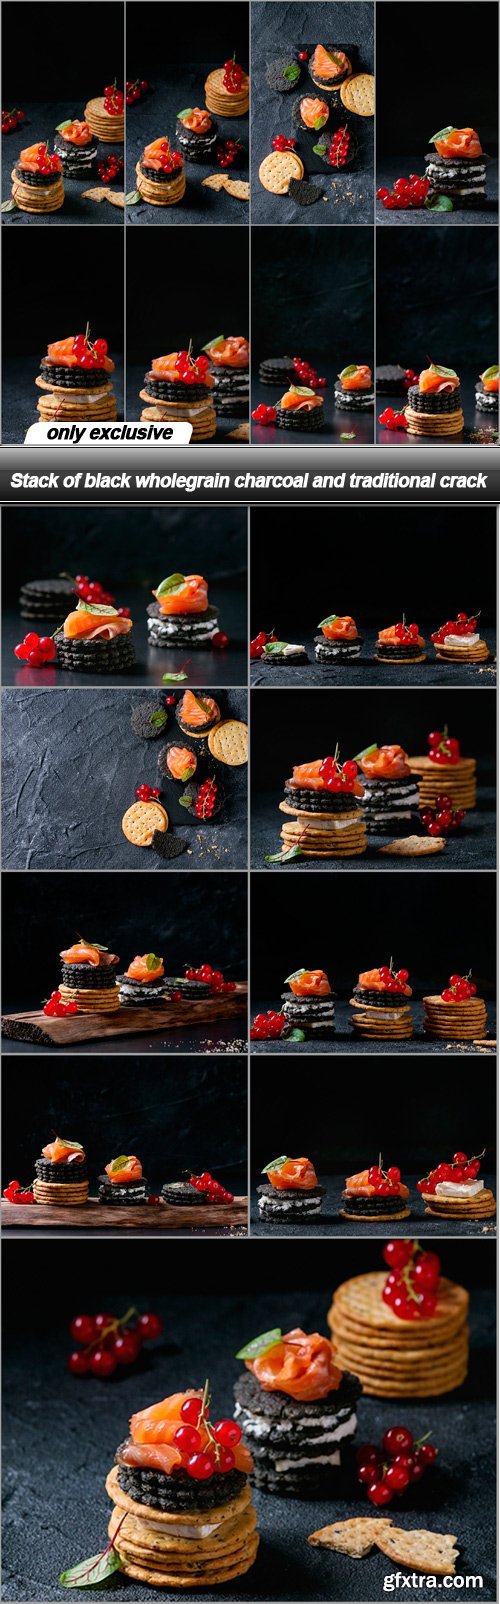 Stack of black wholegrain charcoal and traditional crack - 18 UHQ JPEG